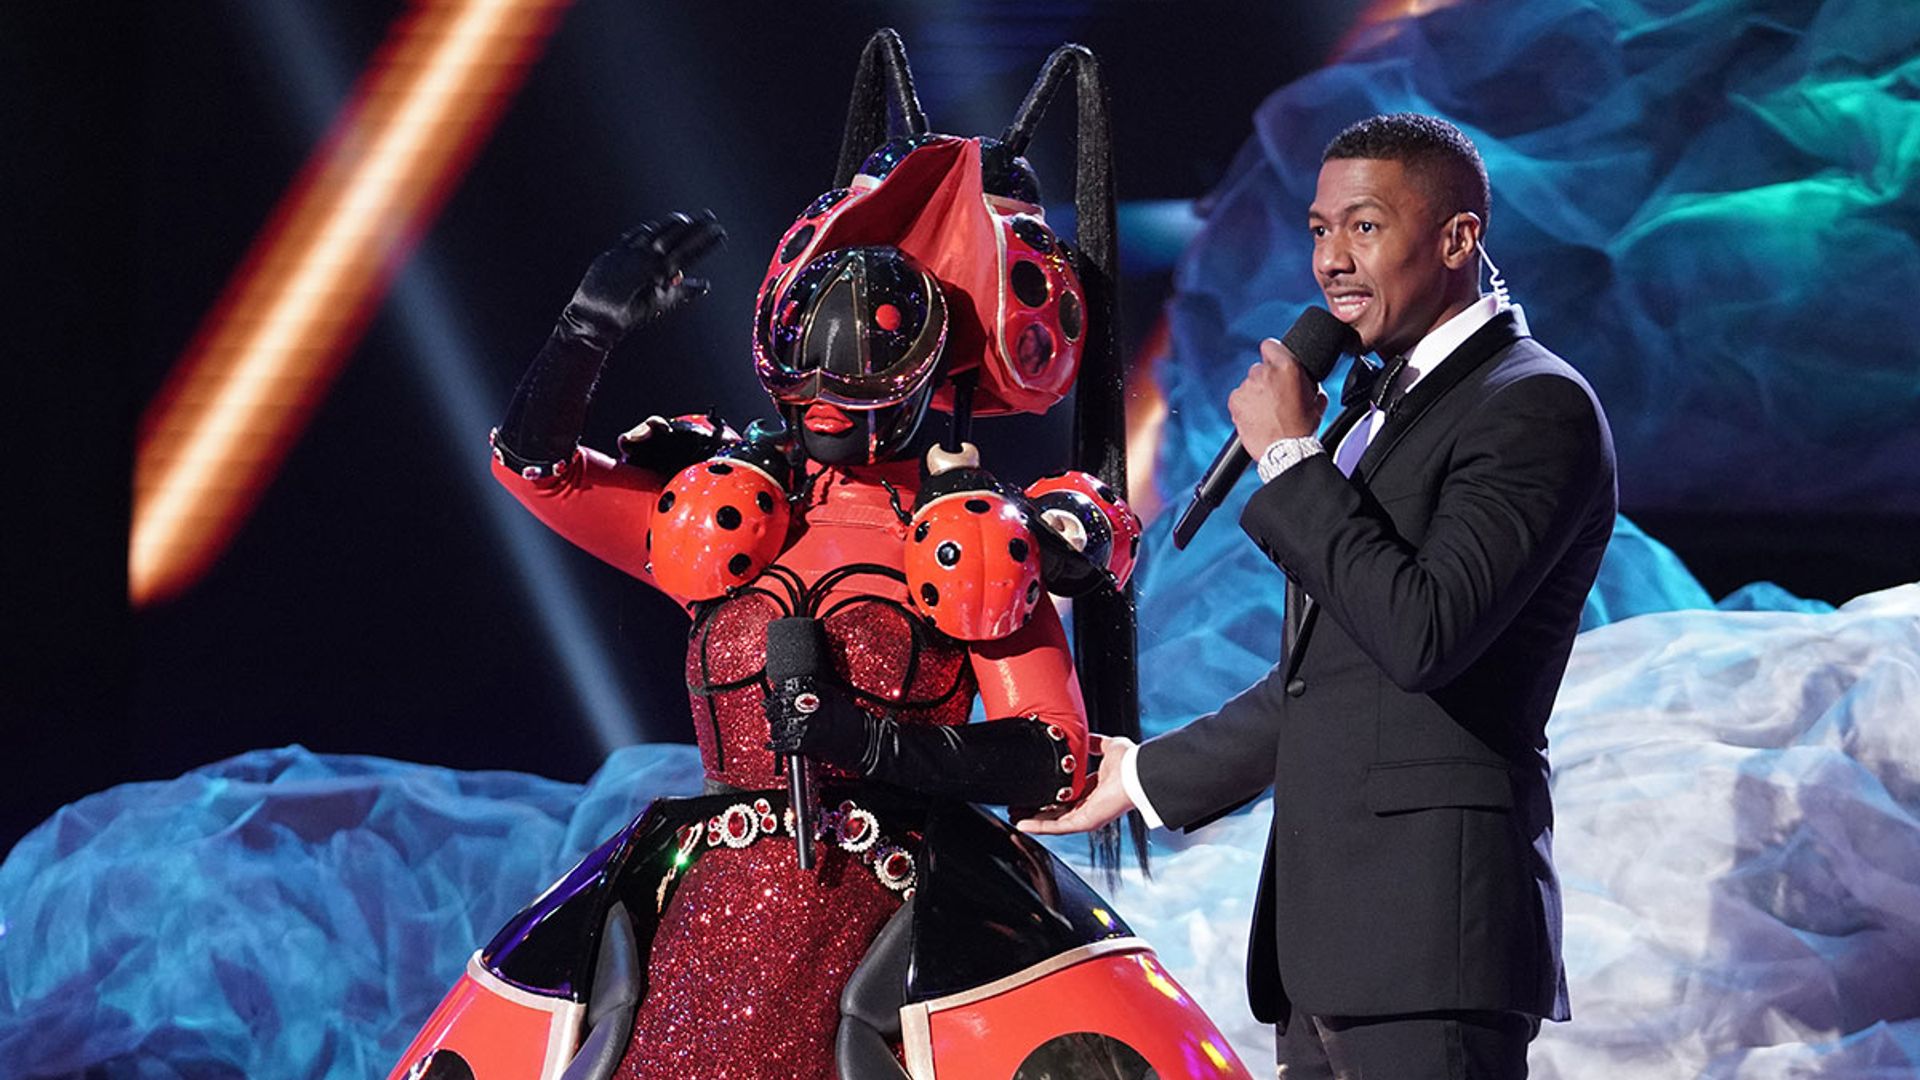 Which celebrities have been revealed on The Masked Singer US so far?